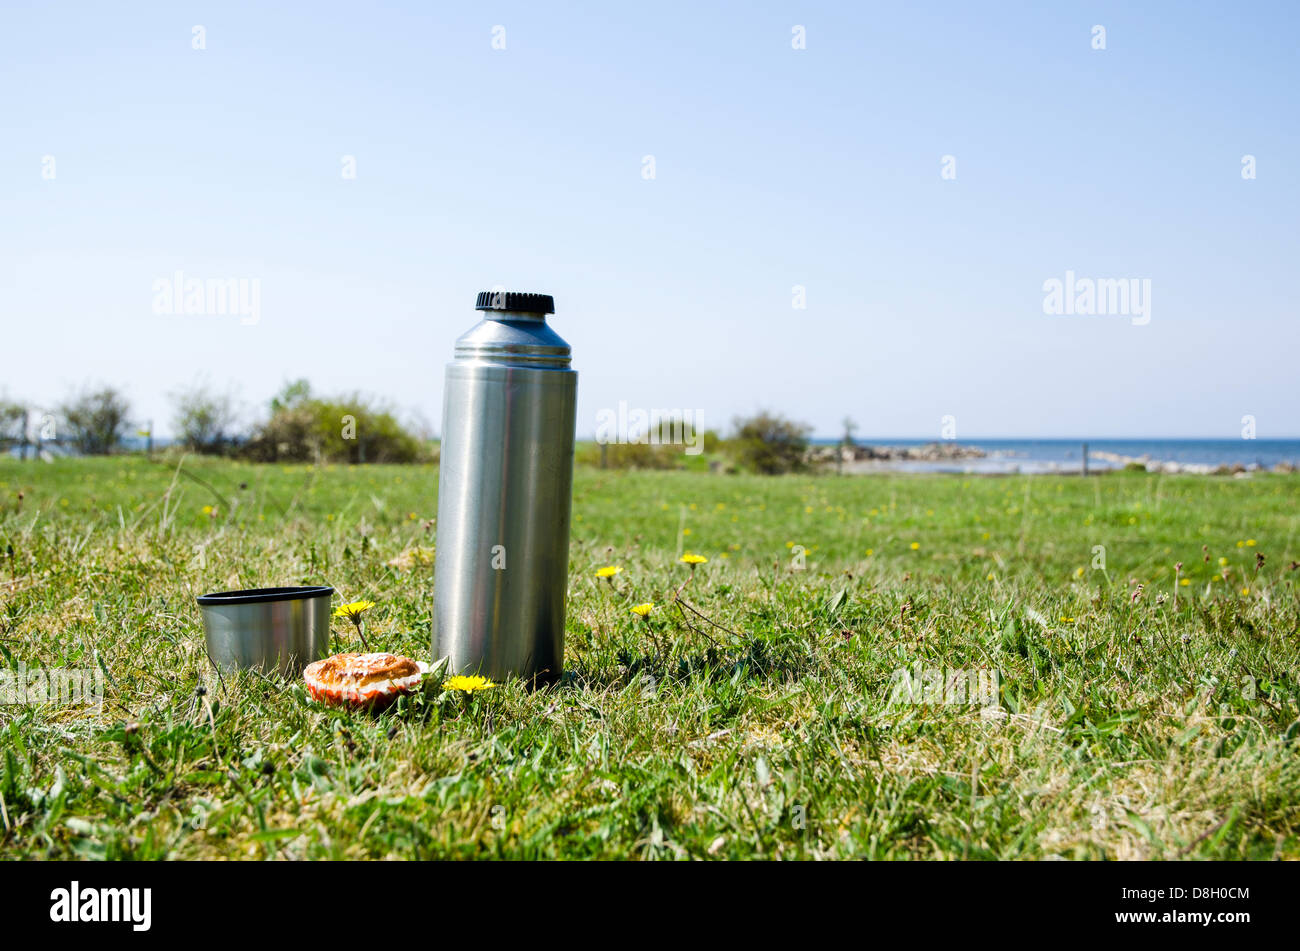 https://c8.alamy.com/comp/D8H0CM/thermos-with-bread-on-a-grass-field-at-the-coast-in-springtime-D8H0CM.jpg